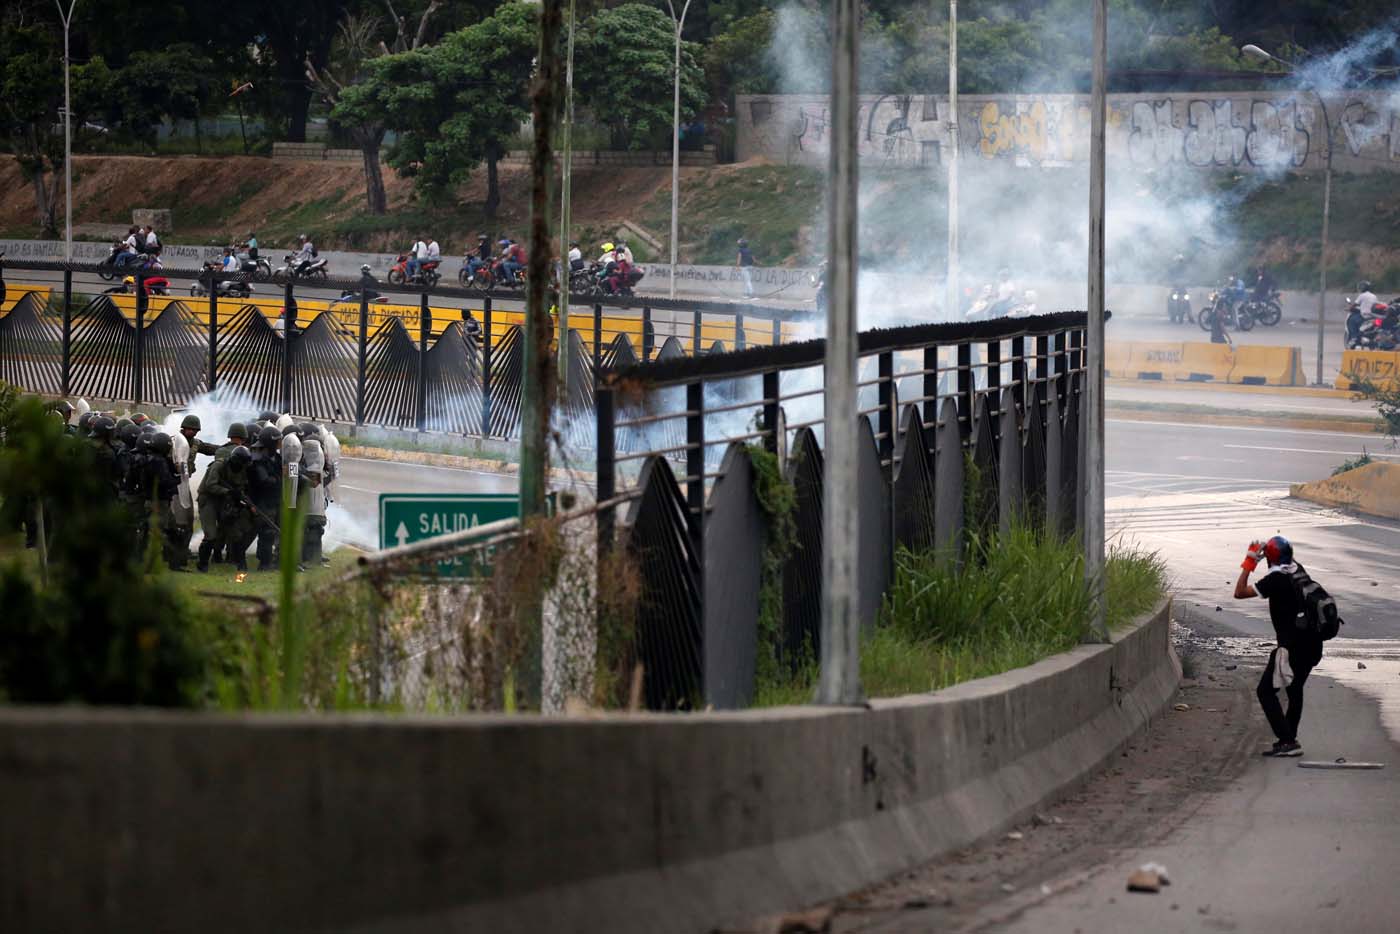 Military police take position at an air base as opposition supporters clash with them while rallying against President Nicolas Maduro in Caracas, Venezuela, May 8, 2017. REUTERS/Carlos Garcia Rawlins